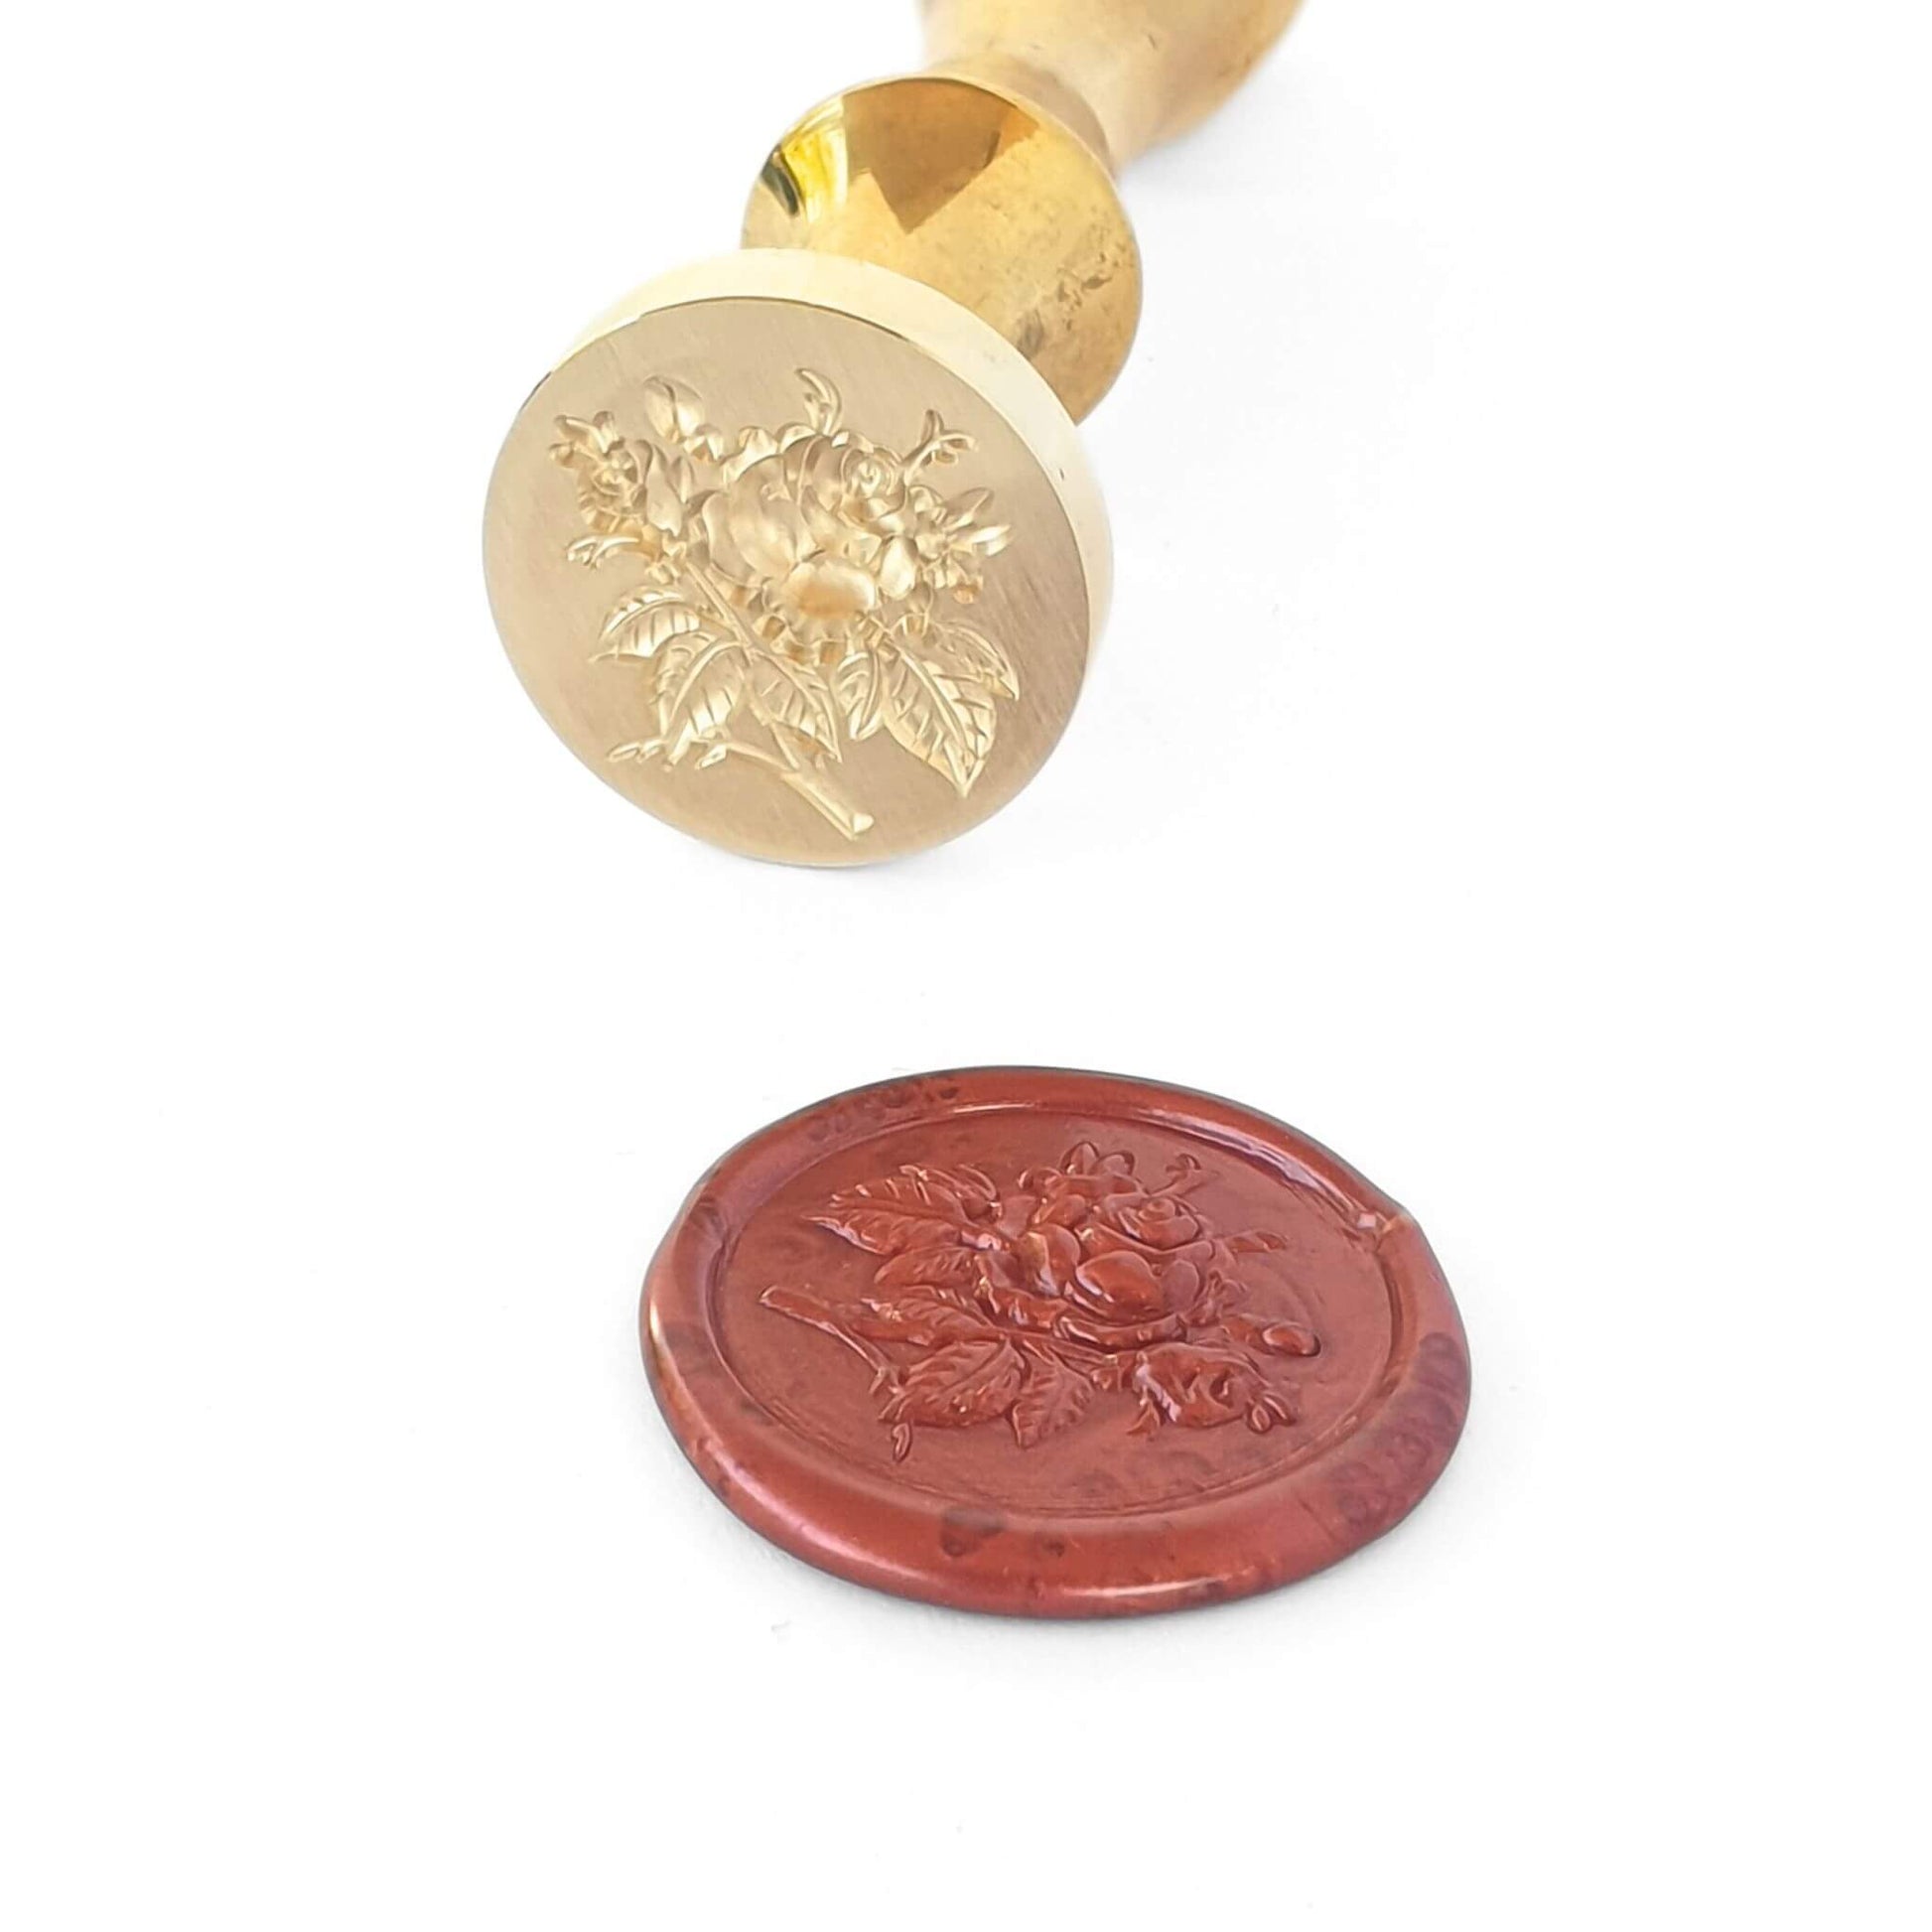 Rose wax seal made from solid brass with gold finish next to red rose wax seal